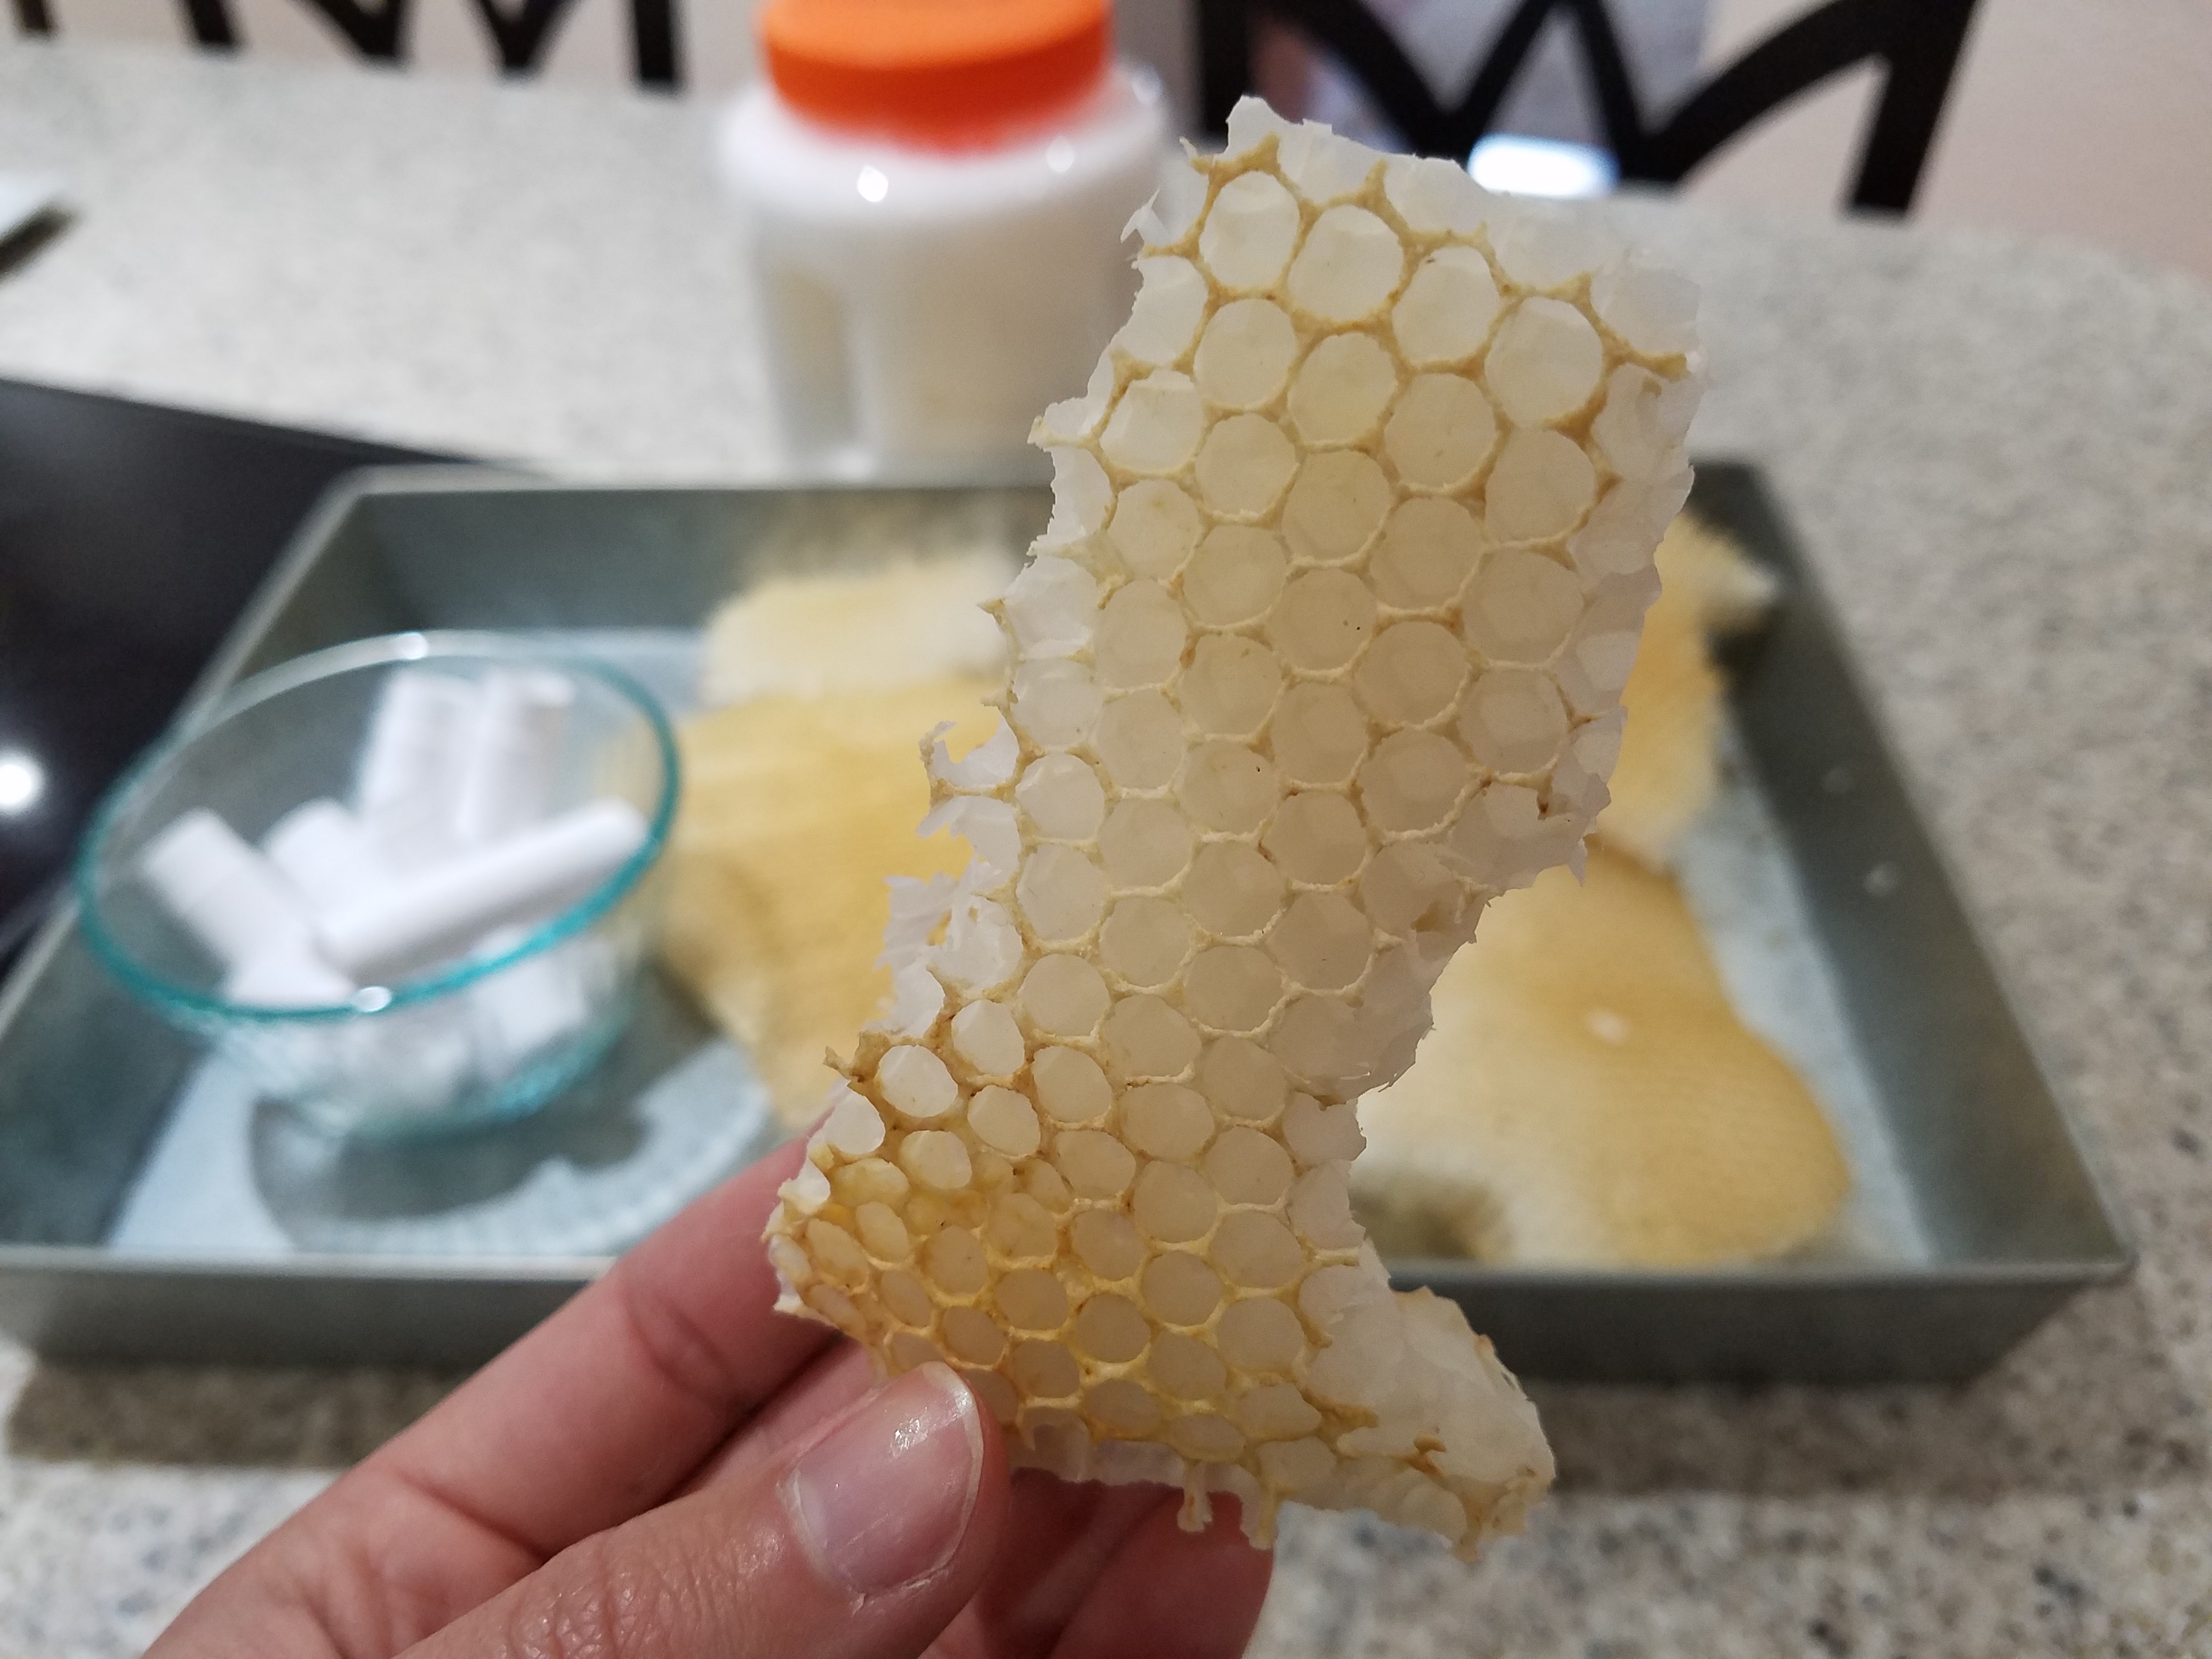 Hand holding piece of raw beeswax comb